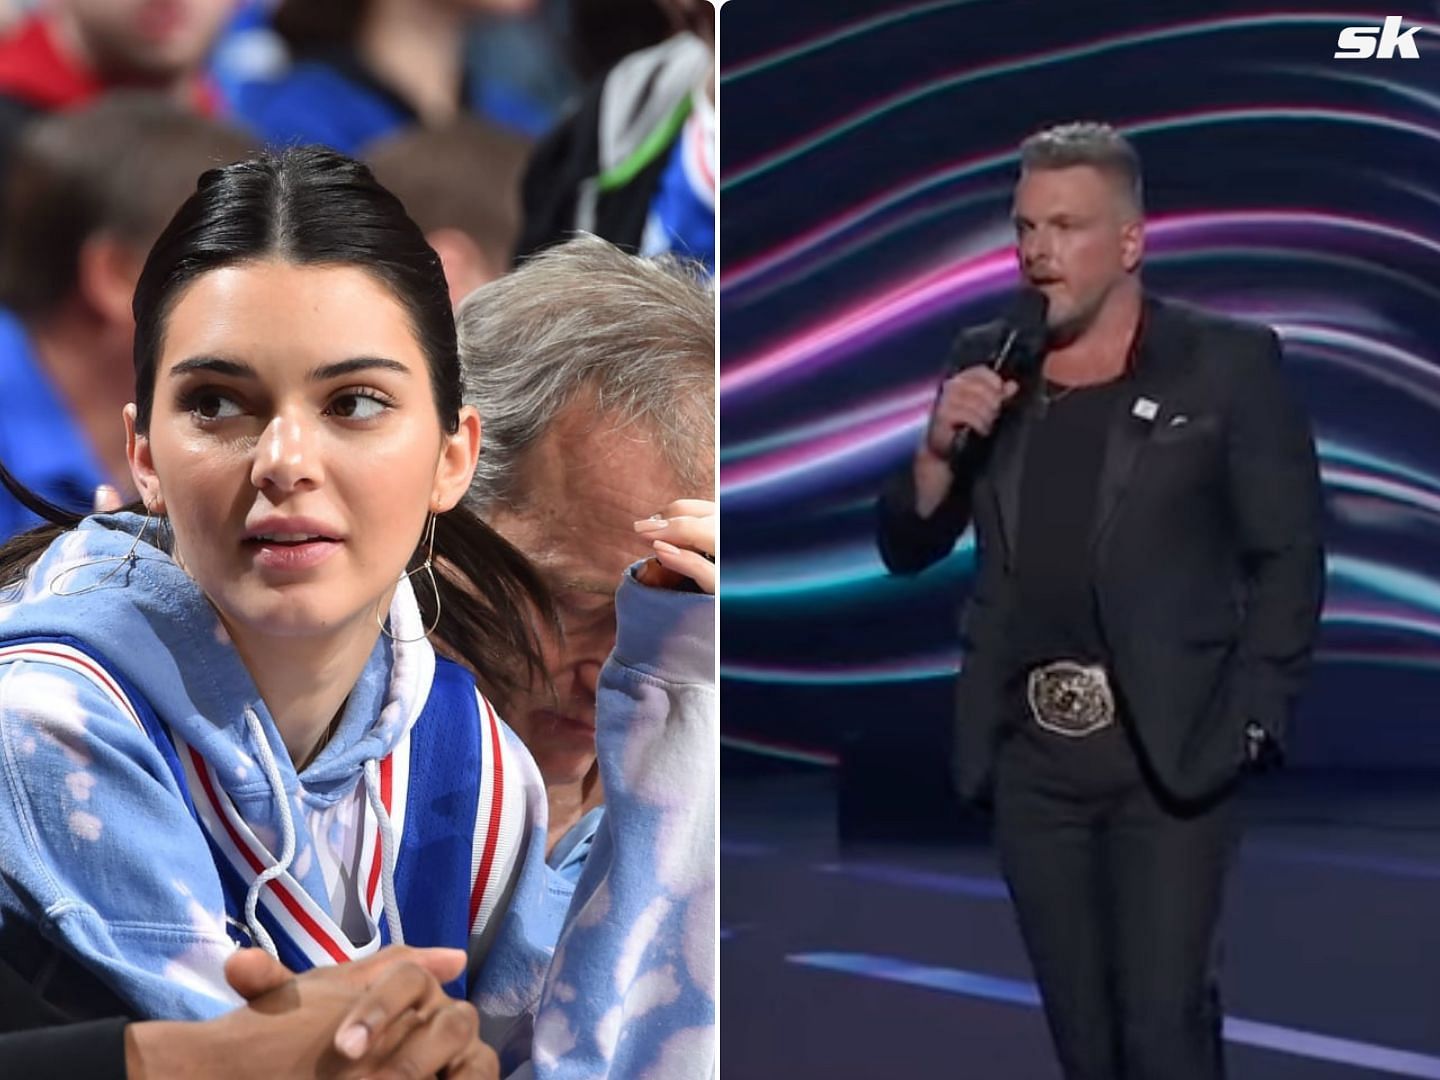 Pat McAfee says Kendall Jenner starting 5 would win the NBA championship every year